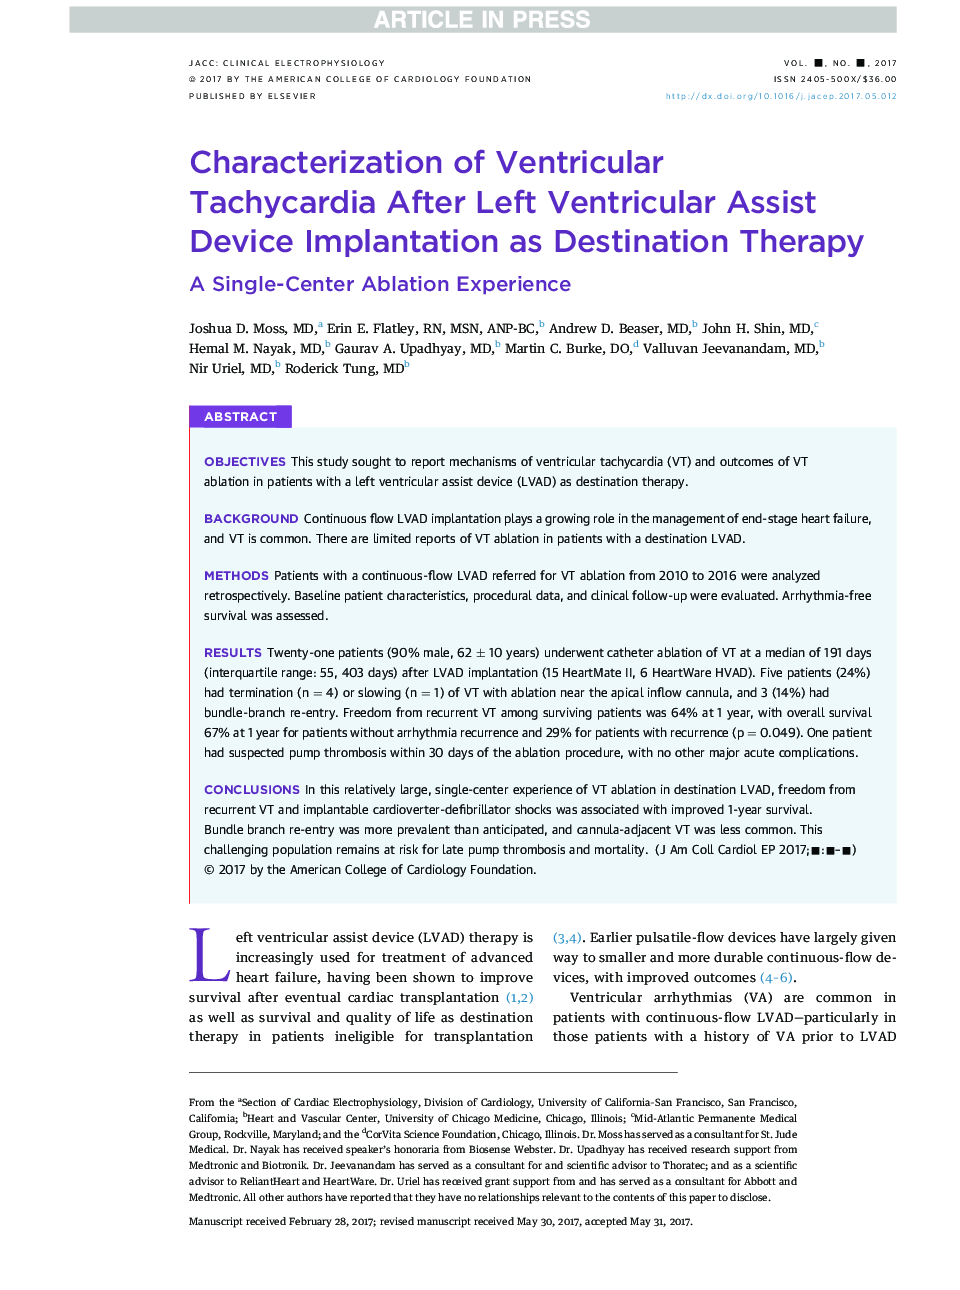 Characterization of Ventricular Tachycardia After Left Ventricular Assist Device Implantation as DestinationÂ Therapy